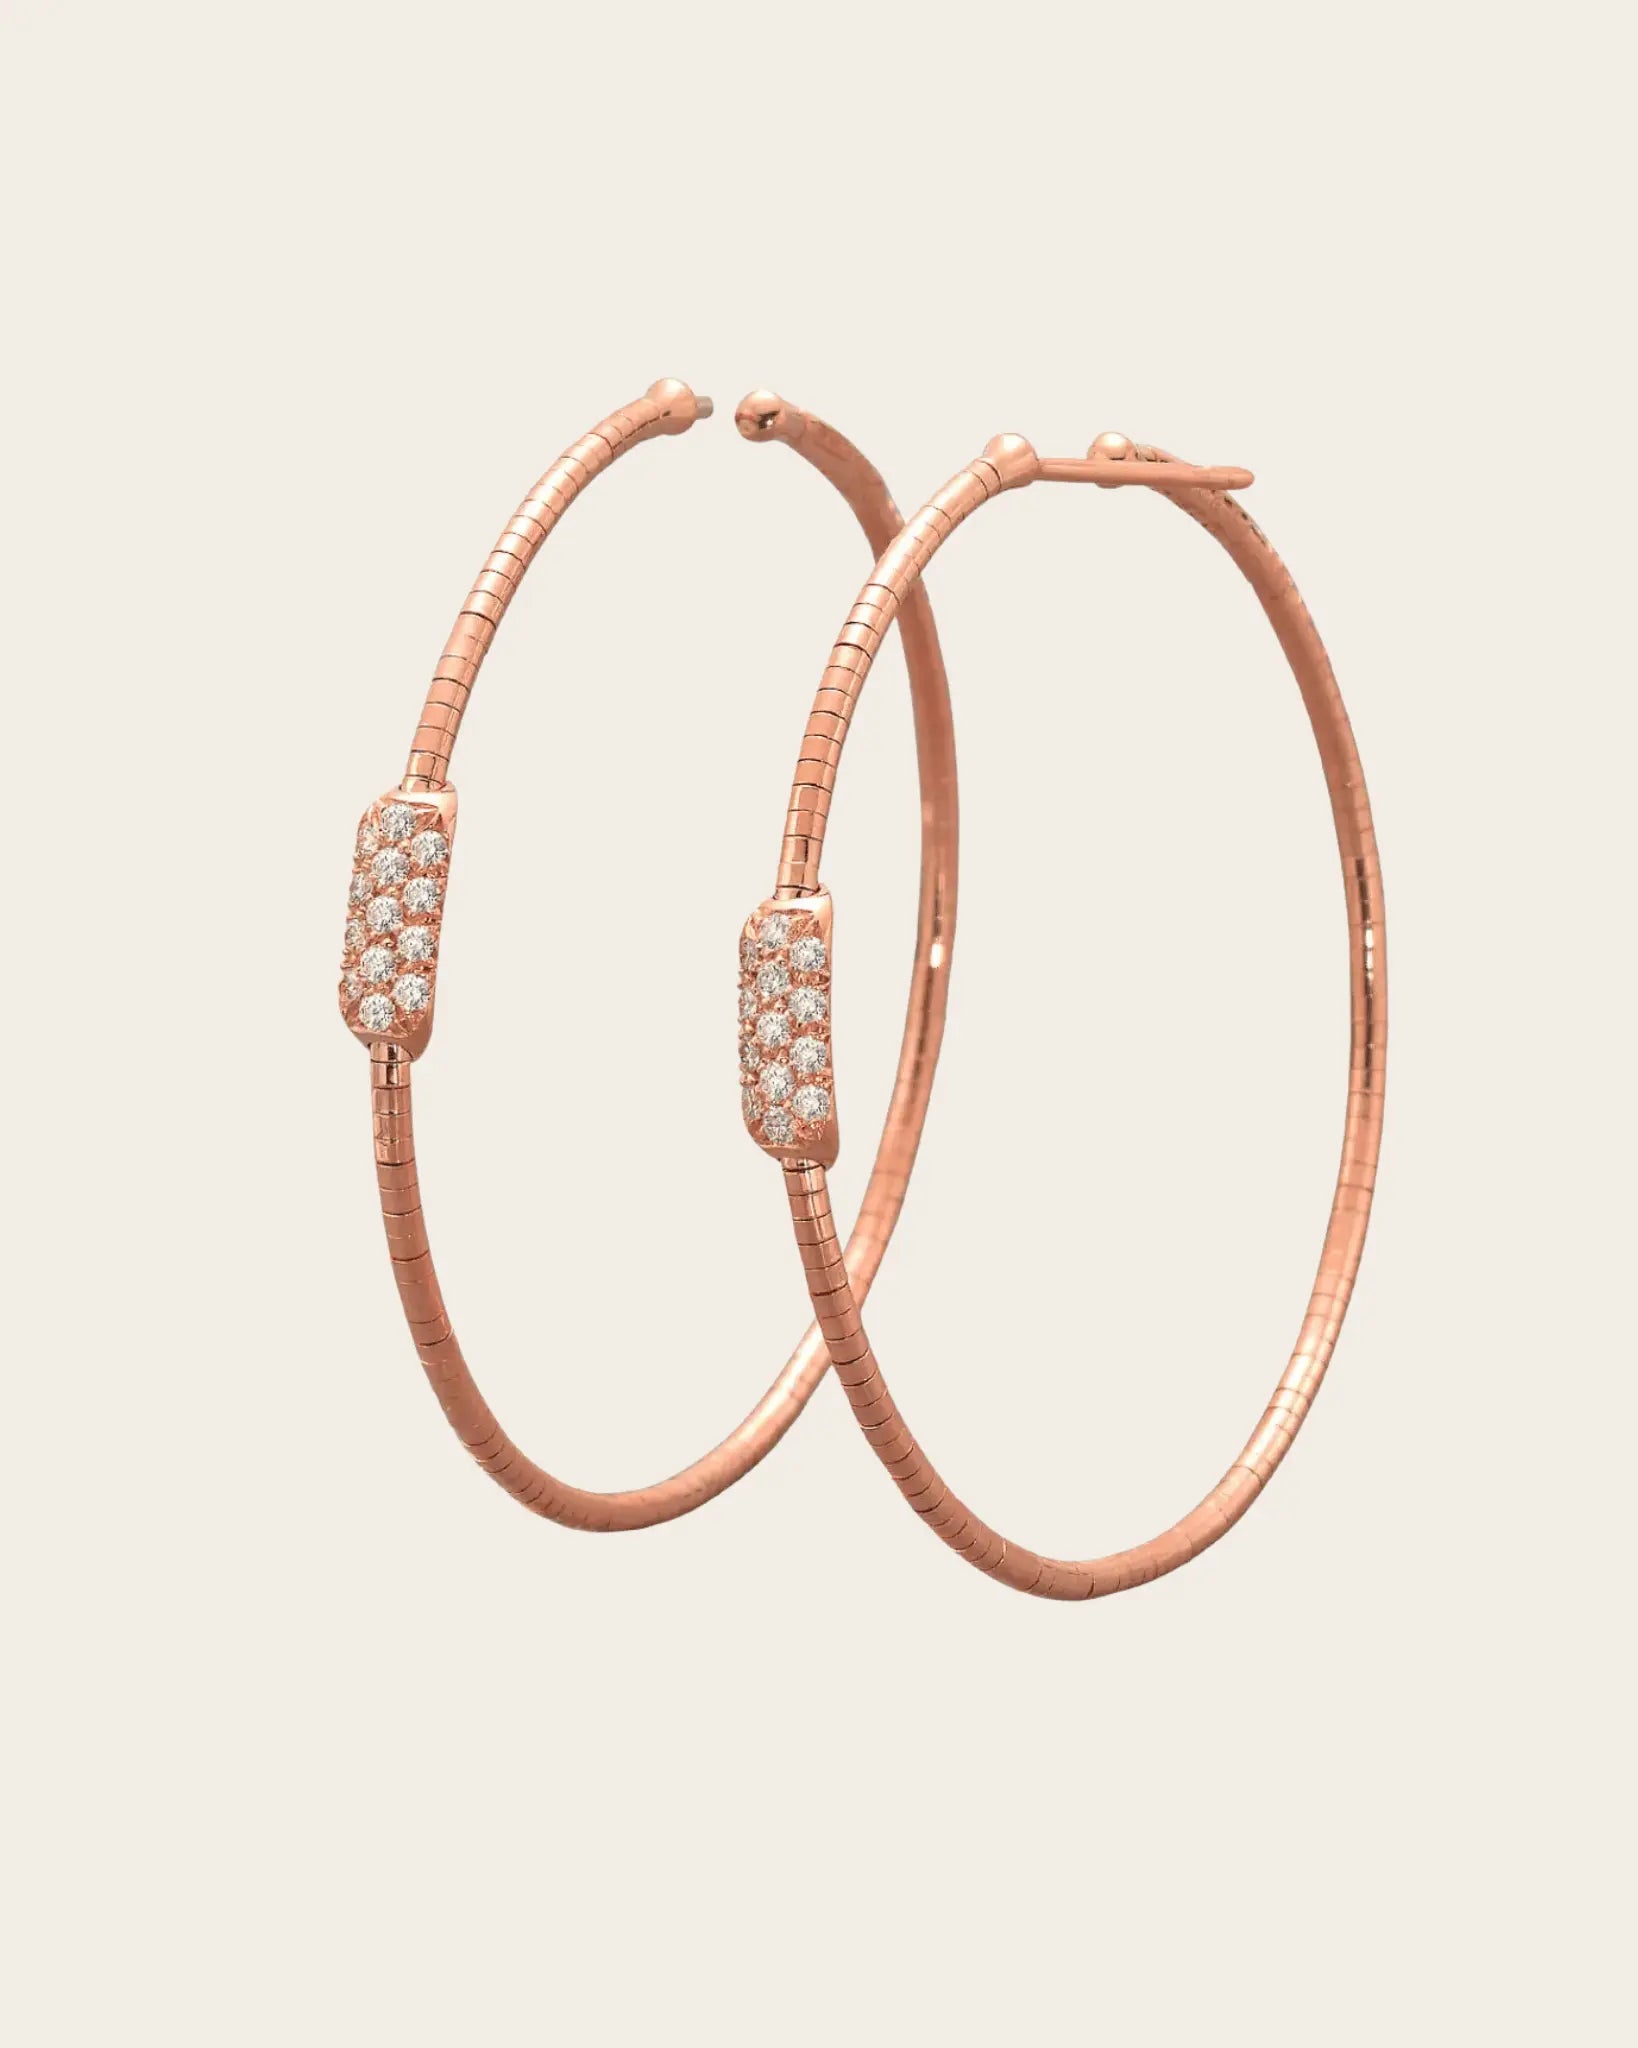 Rose Gold Hoop Earrings with Pave Diamonds Rose Gold Hoop Earrings with Pave Diamonds Mattia Cielo Mattia Cielo  Squash Blossom Vail